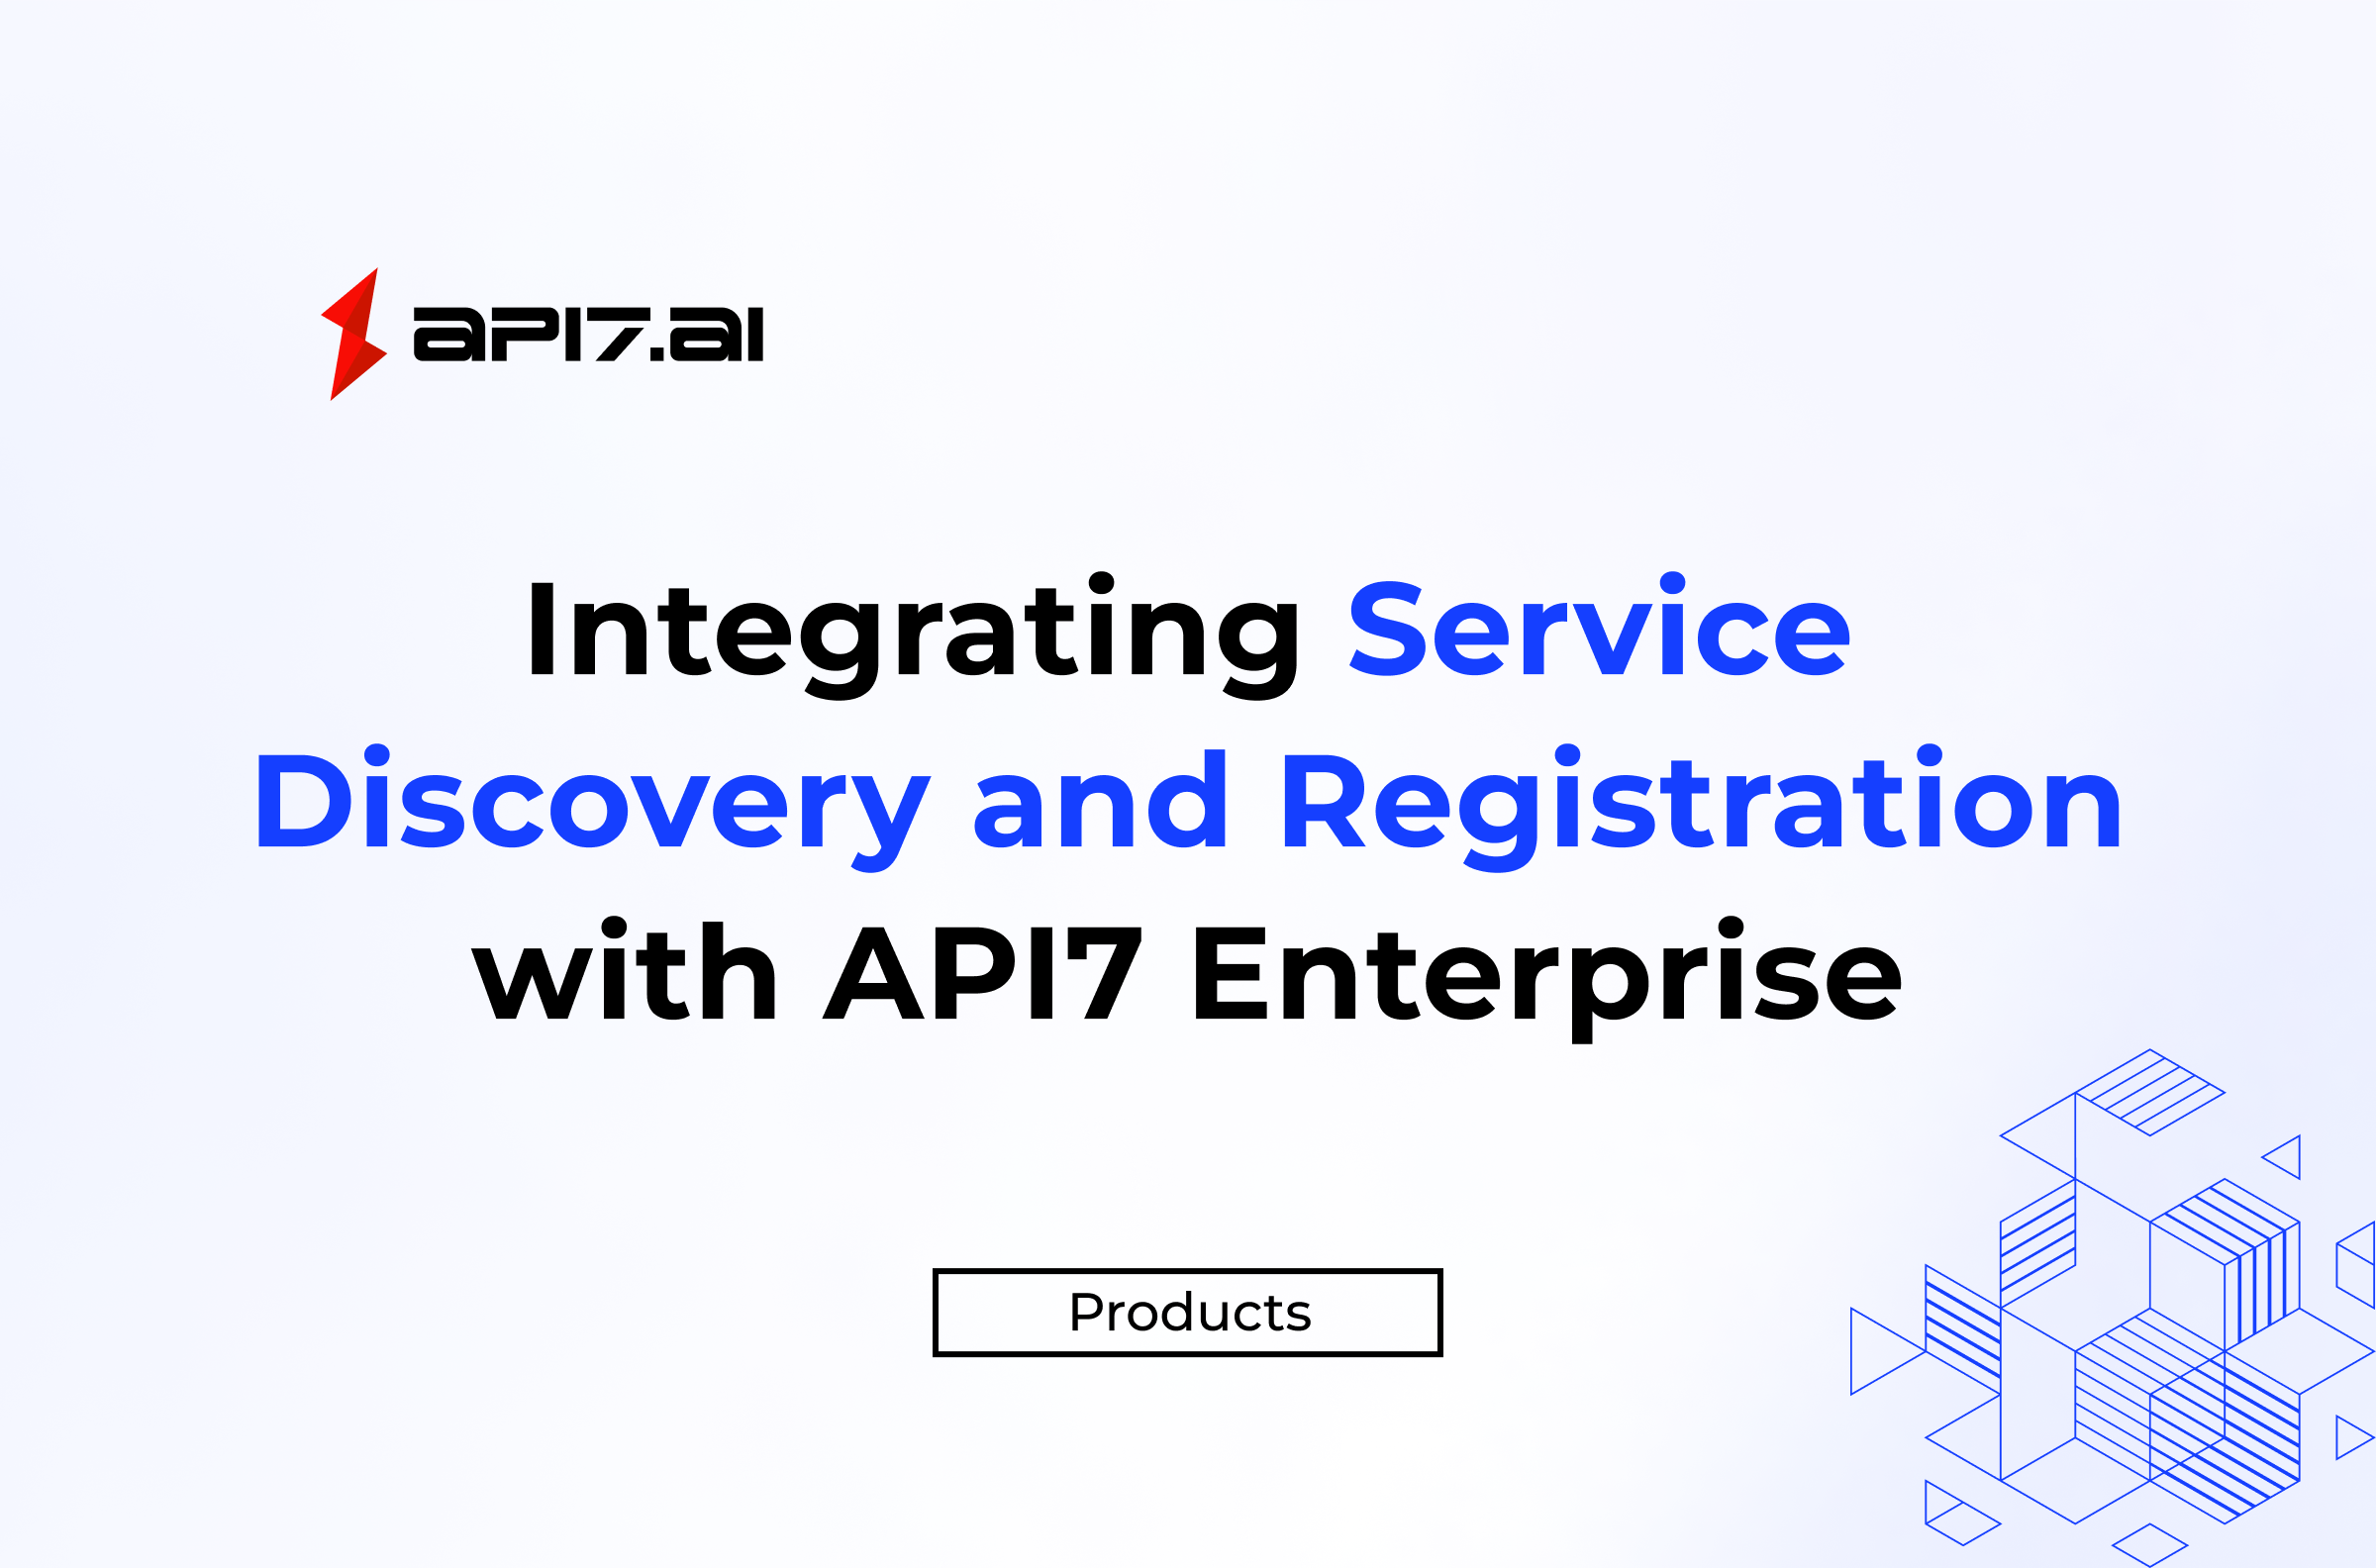 Integrating Service Discovery and Registration with API7 Enterprise